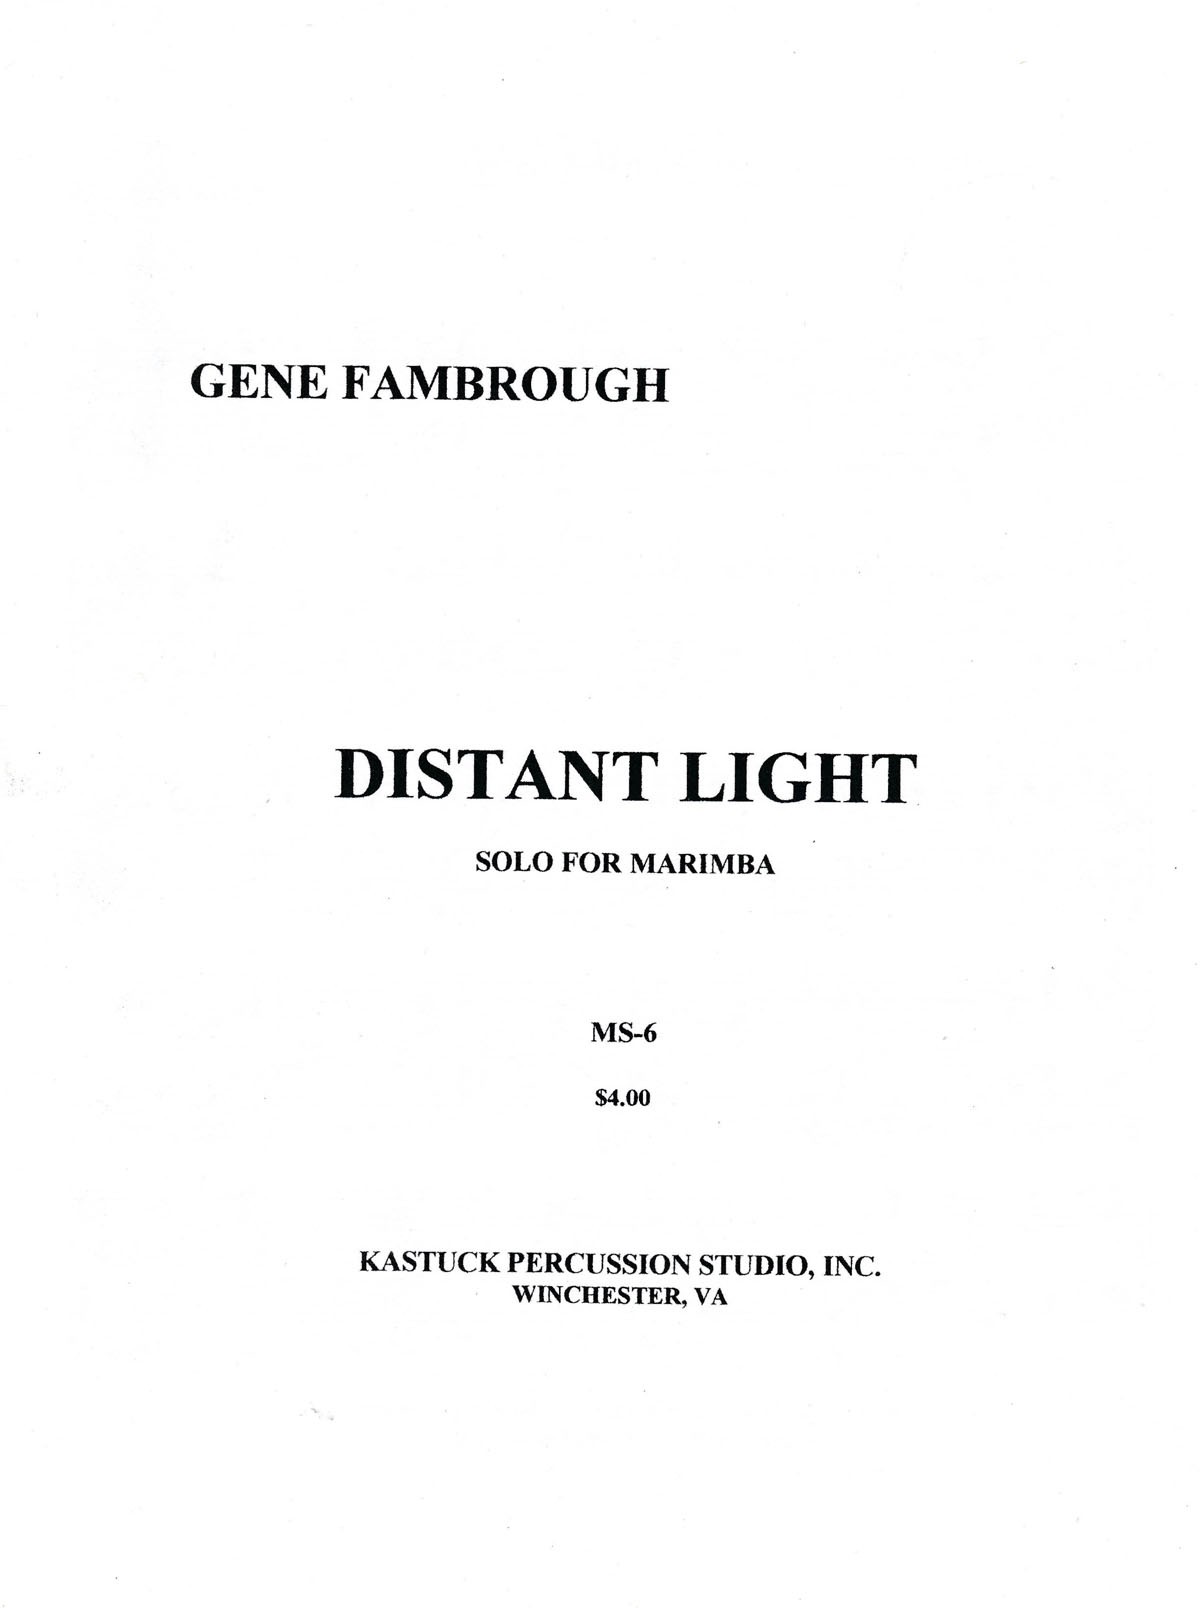 Distant Light by Gene Fambrough